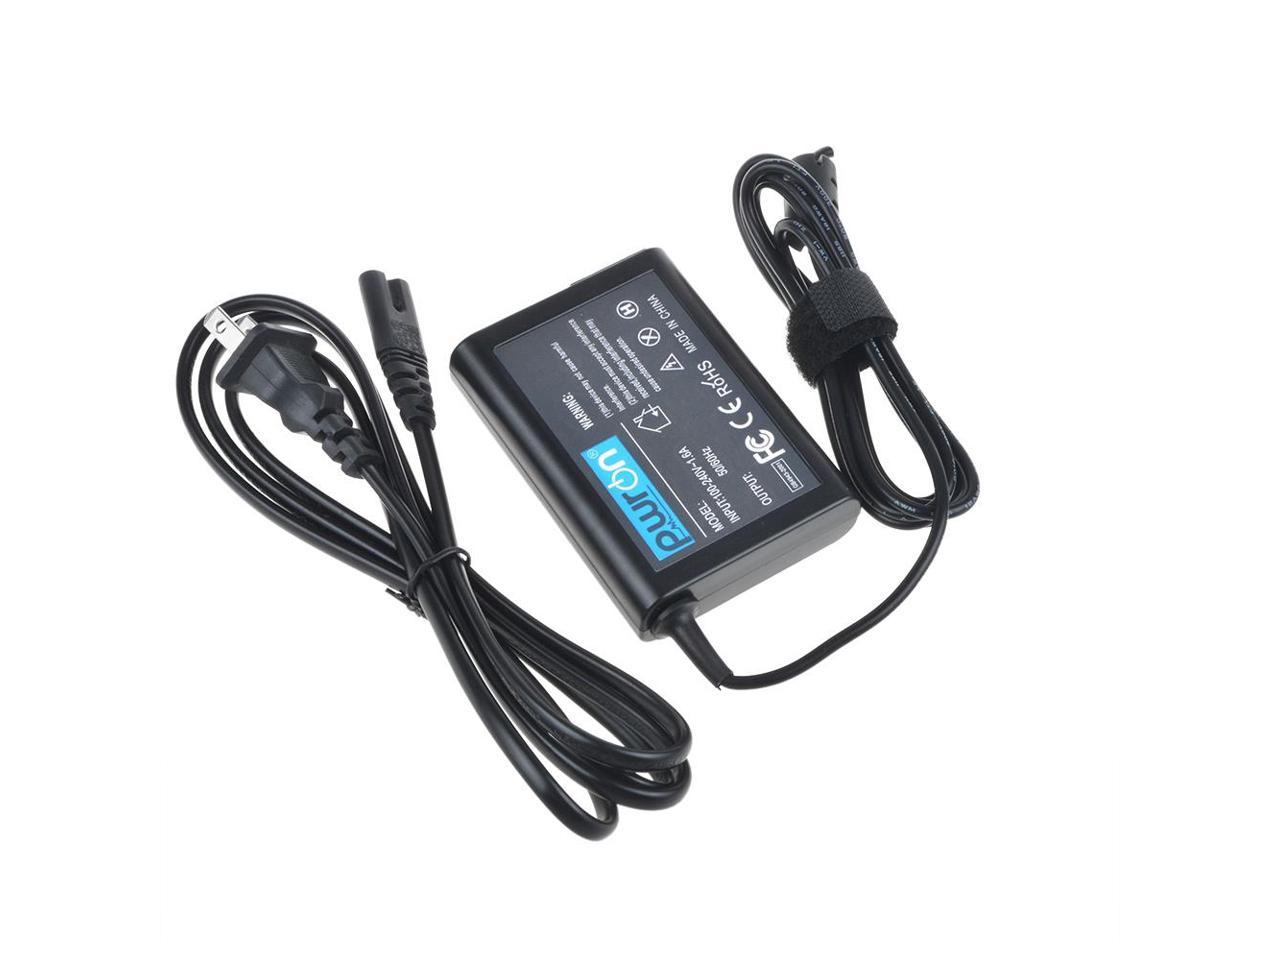 100-240 VAC 50/60Hz Worldwide Voltage Use Mains PSU AC/DC Adapter for Vizio VM230XVT Part No. 10216010033 Razor LED HDTV LCD HD TV Power Supply Cord Cable Charger Input 